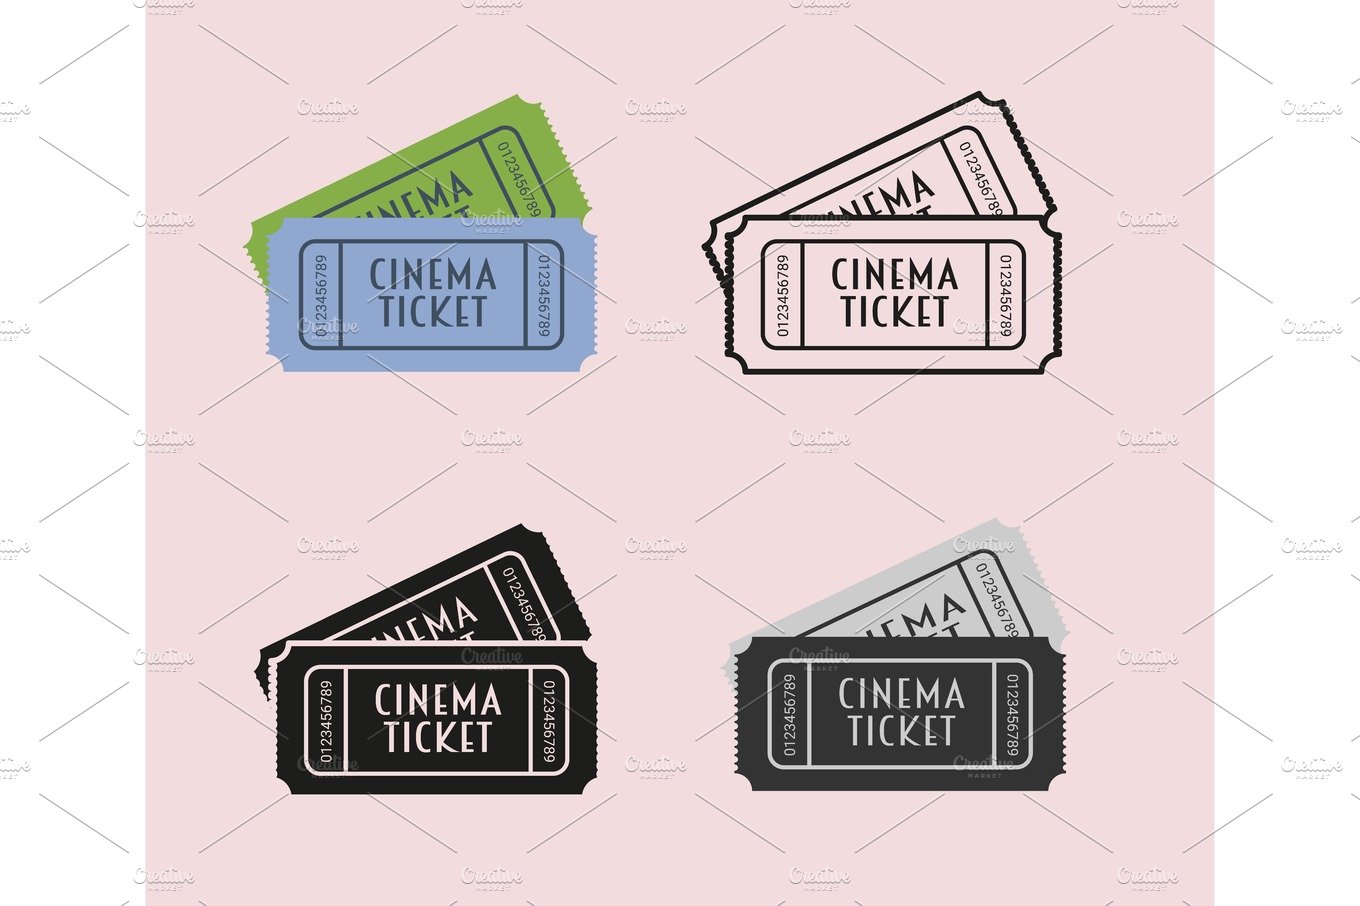 Movie icon set with cinema tickets cover image.